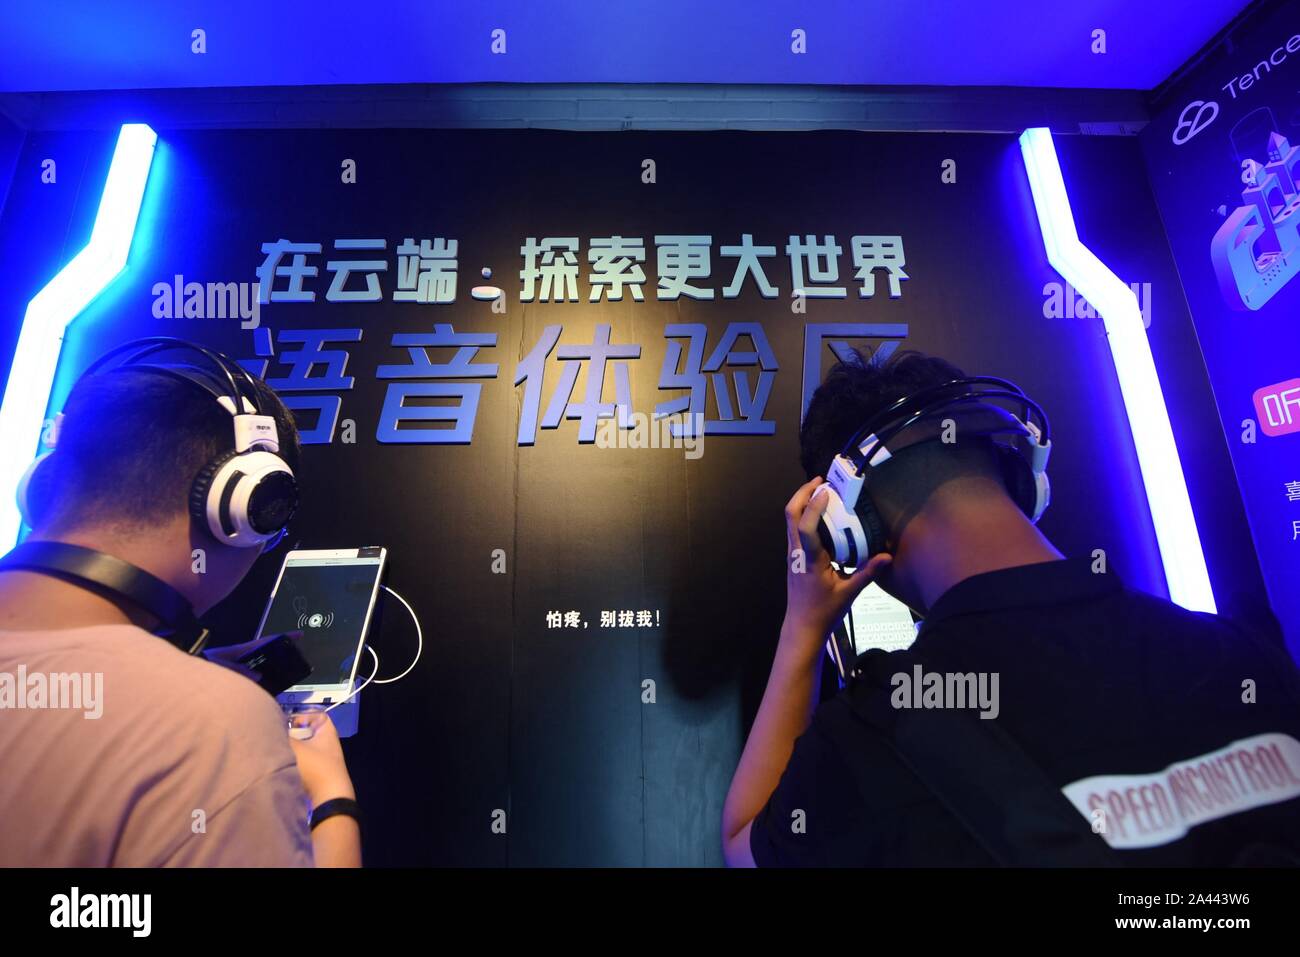 People visit a cafe launched by Tencent Cloud during the 17th China Digital Entertainment Expo, also known as ChinaJoy 2019, in Shanghai, China, 2 Aug Stock Photo